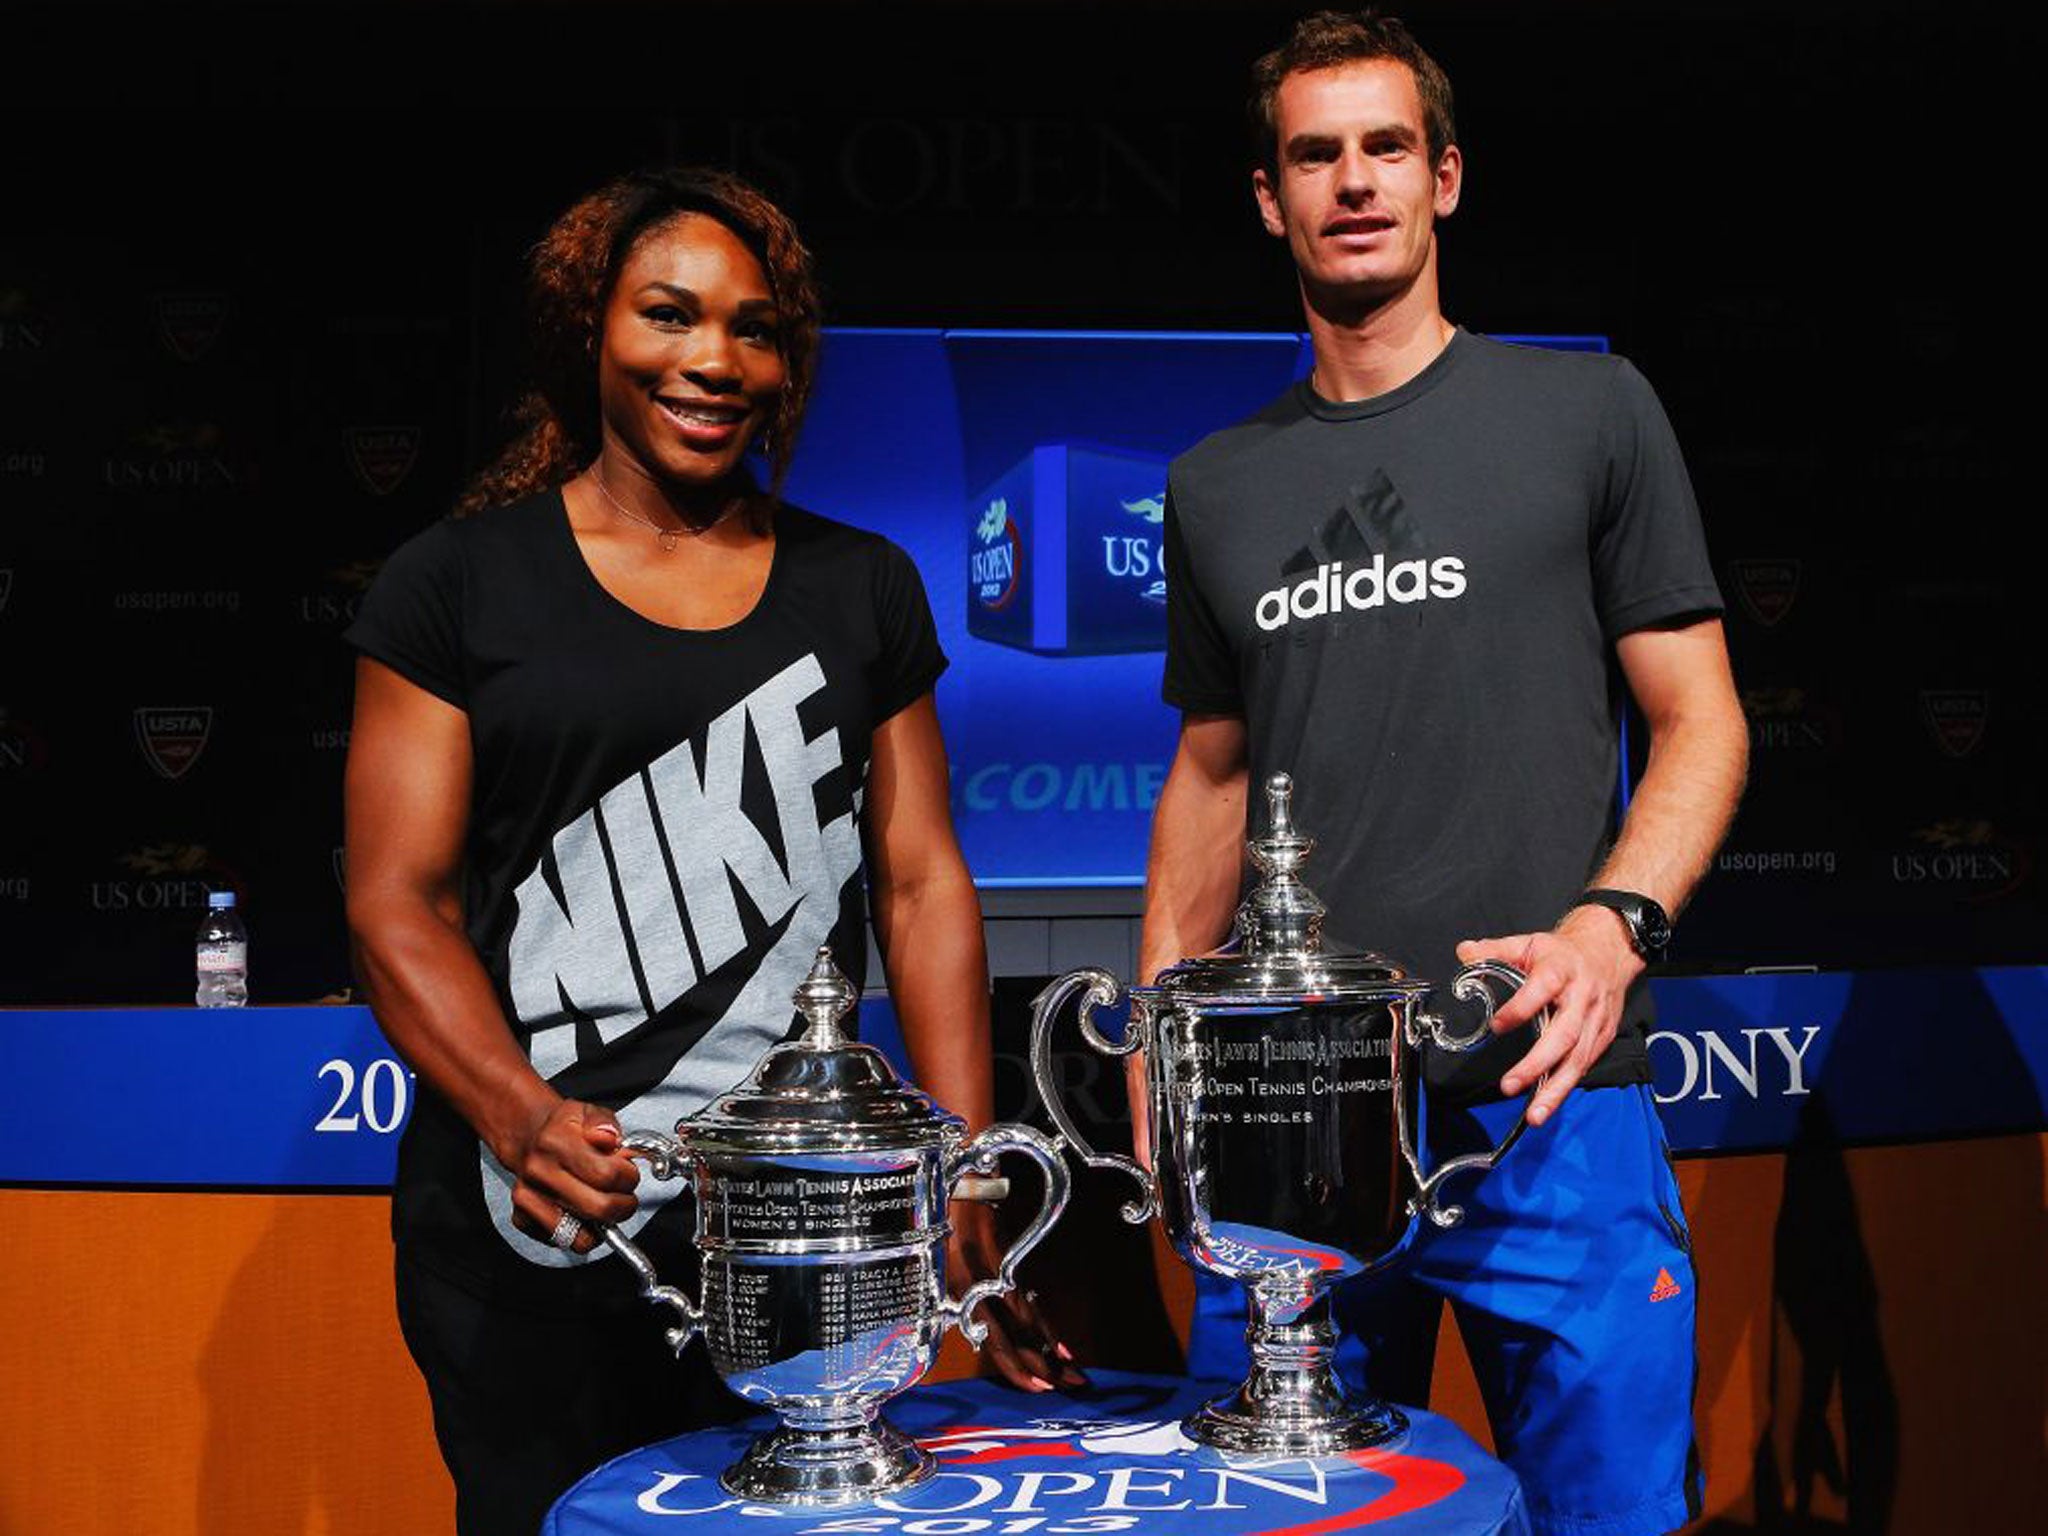 Defending champions Serena Williams and Andy Murray pose ahead of next week’s US Open